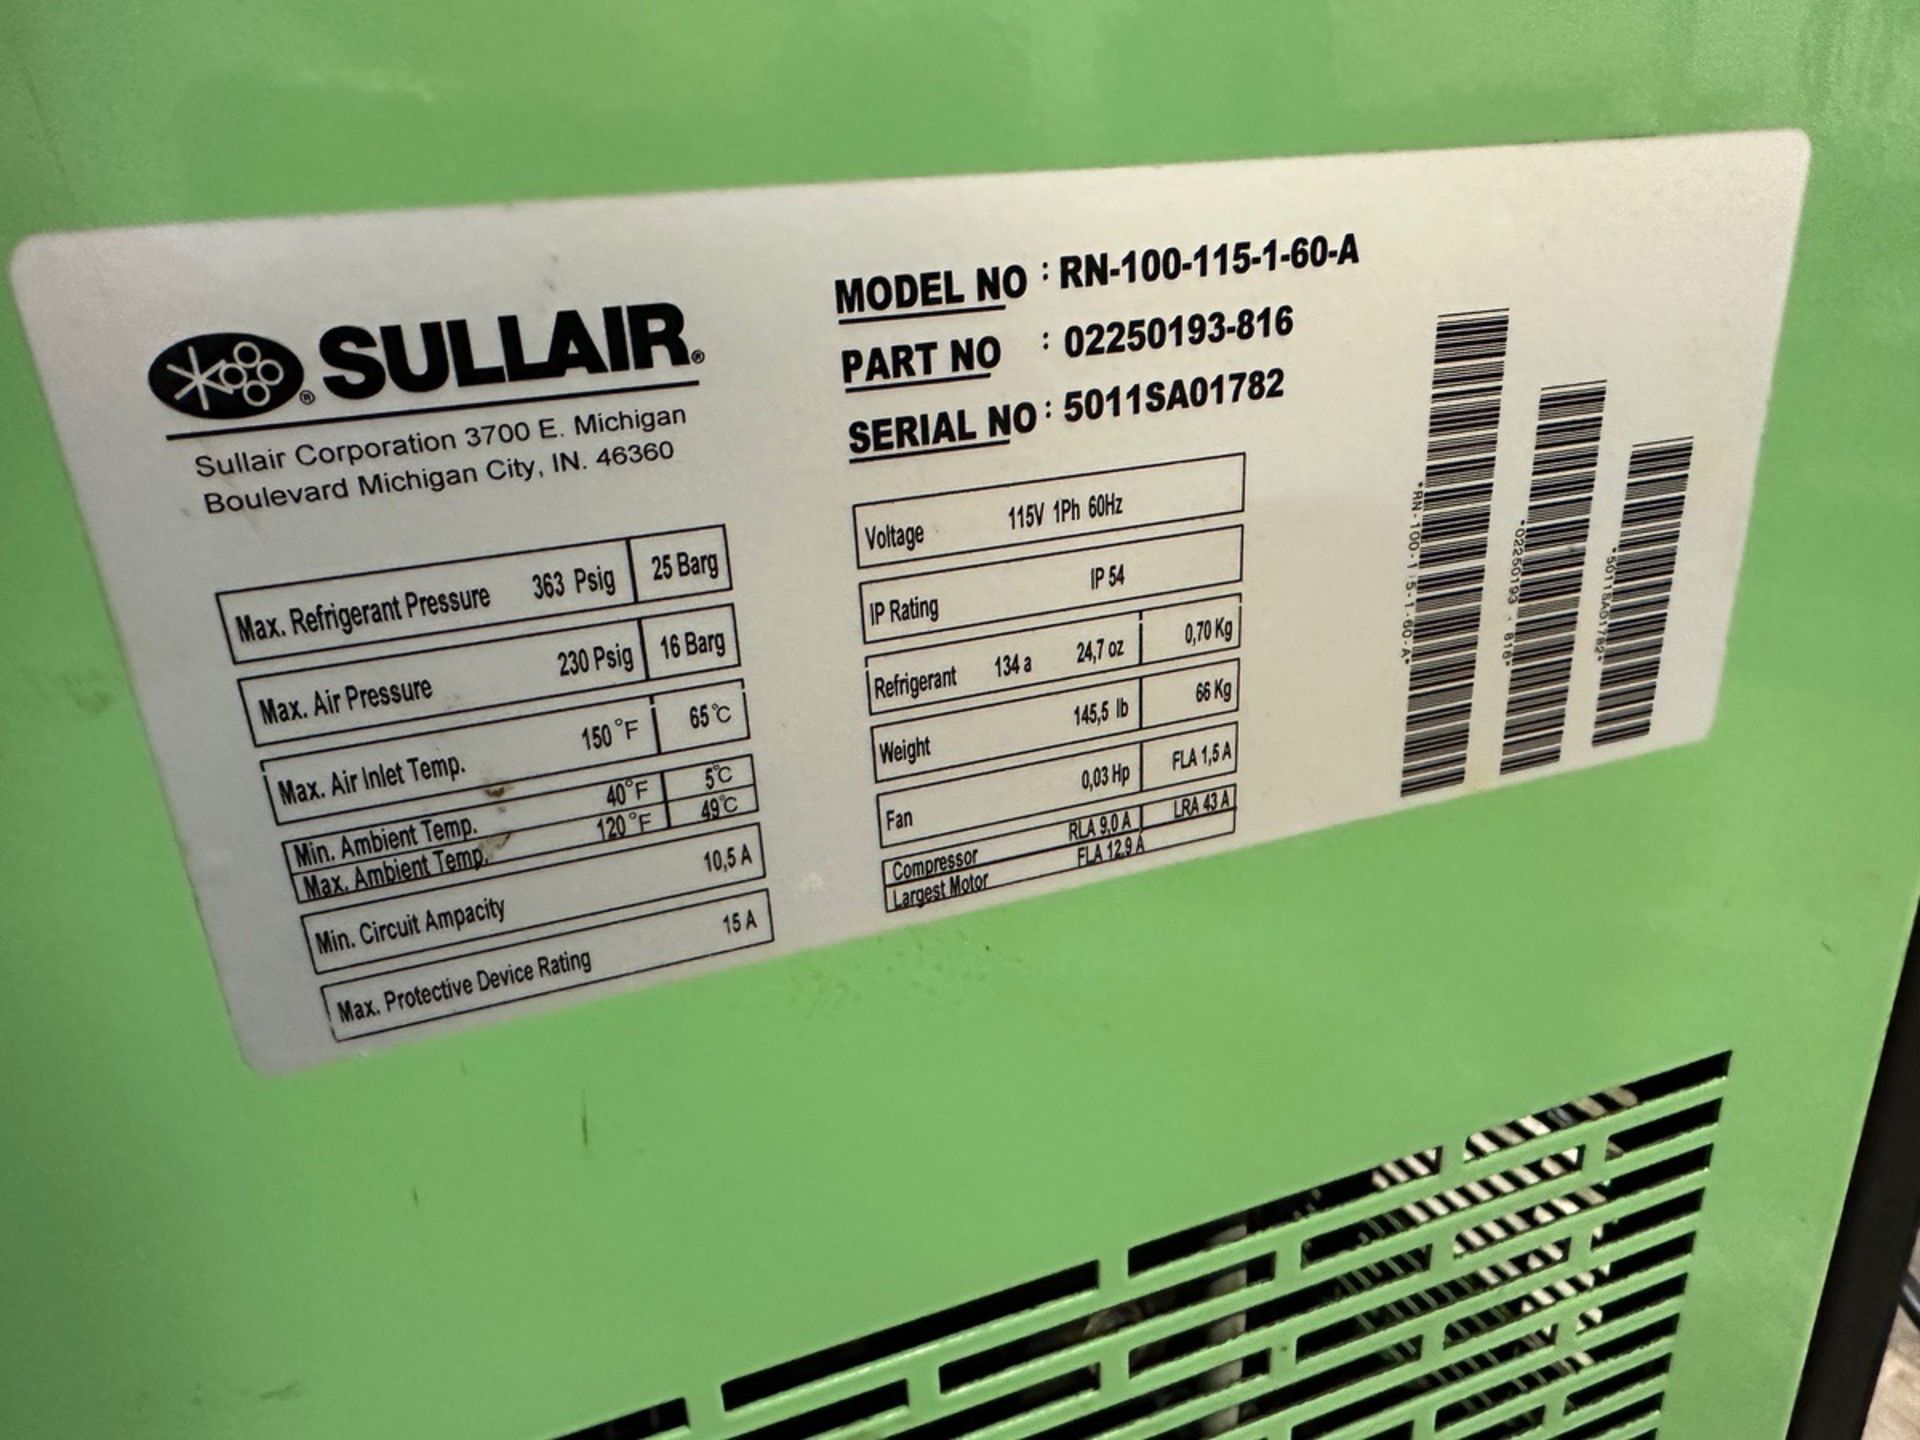 Sullair Refrigerated Air Dryer - Model RN-100-115-1-60-A | Rig Fee $150 - Image 2 of 3